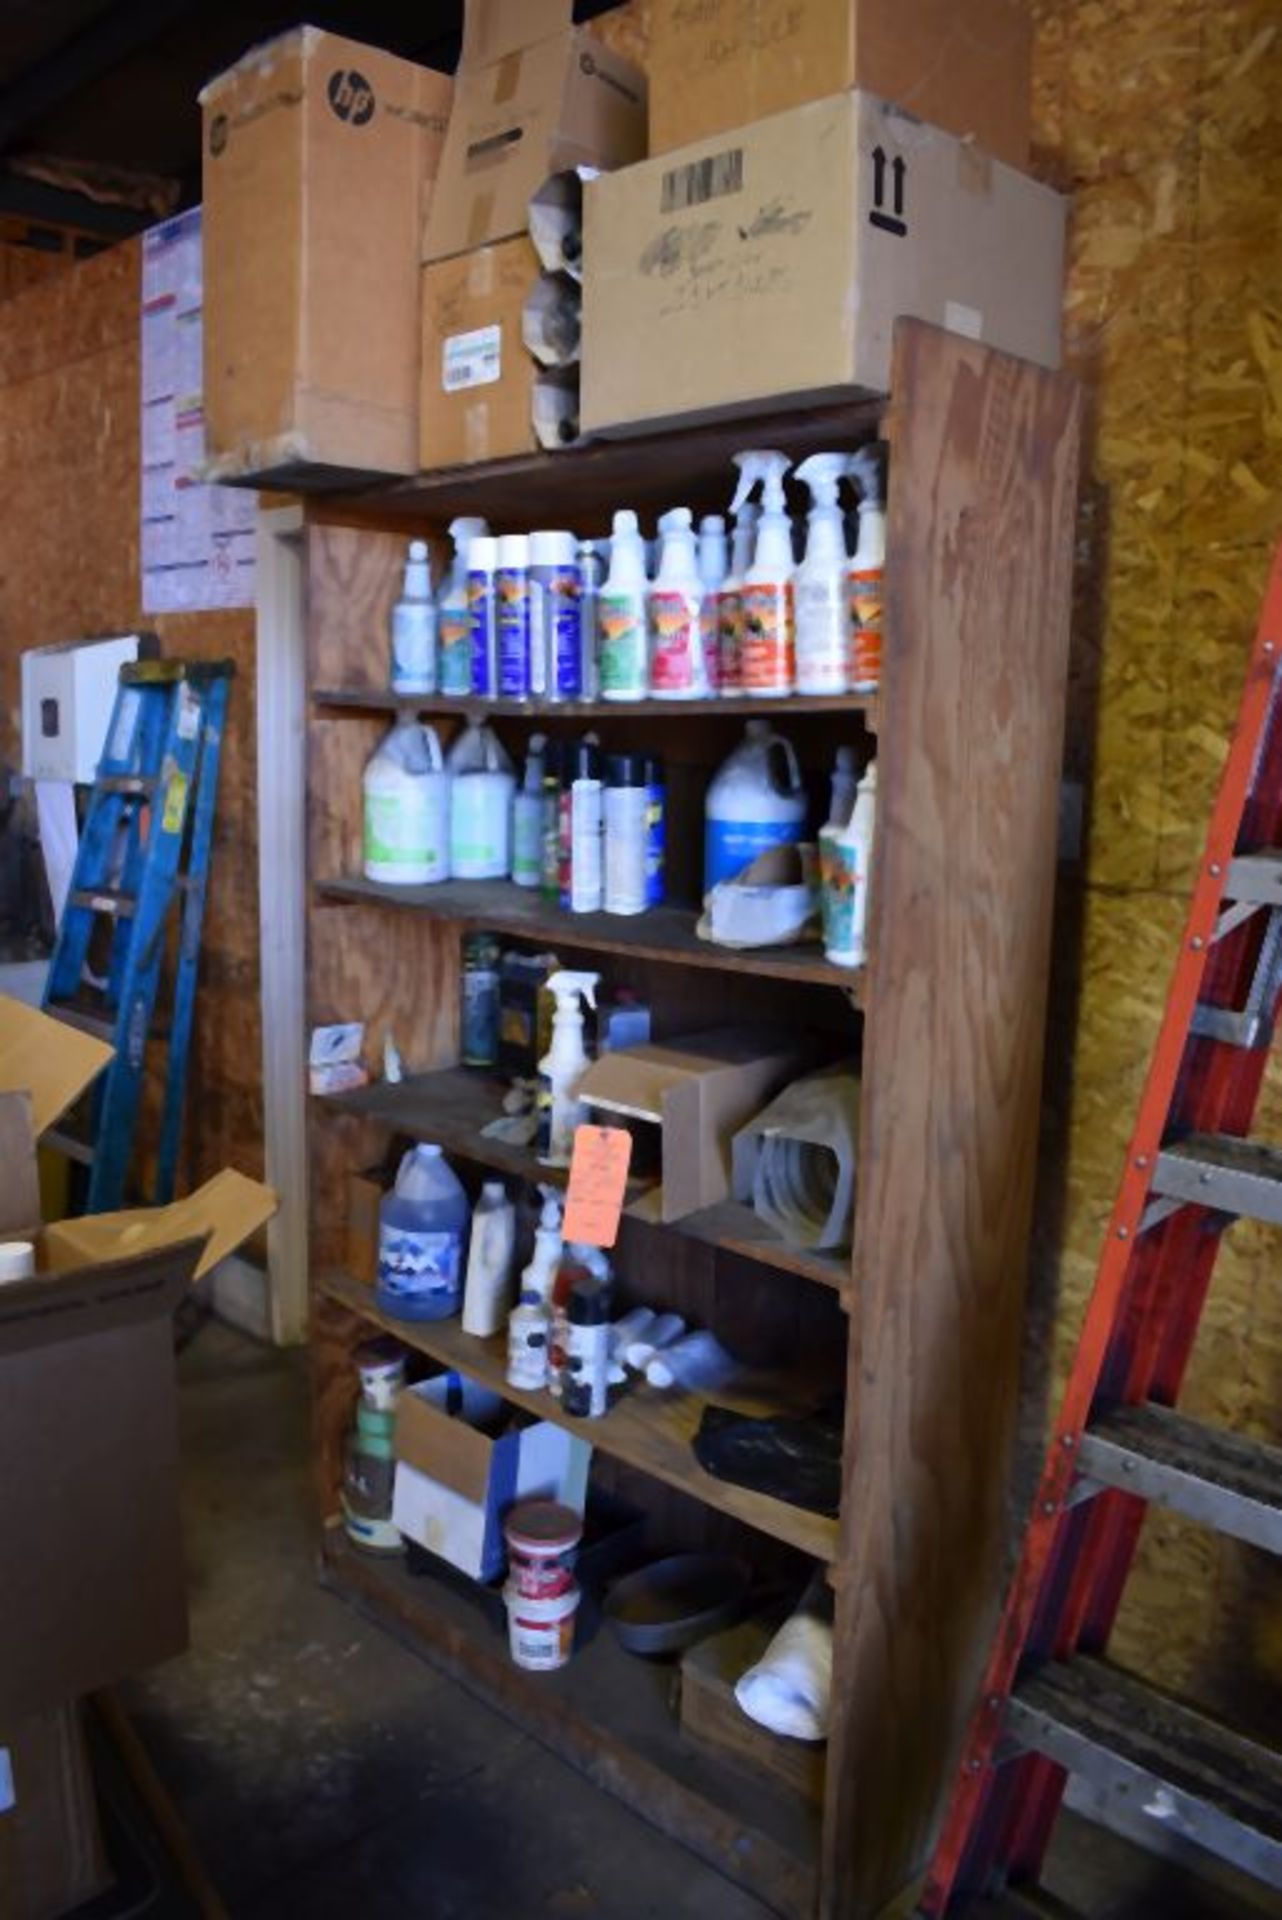 FIVE SHELF HOMEMADE WOODEN SHELVING UNIT WITH CONTENTS, PRIMARILY CLEANING SUPPLIES